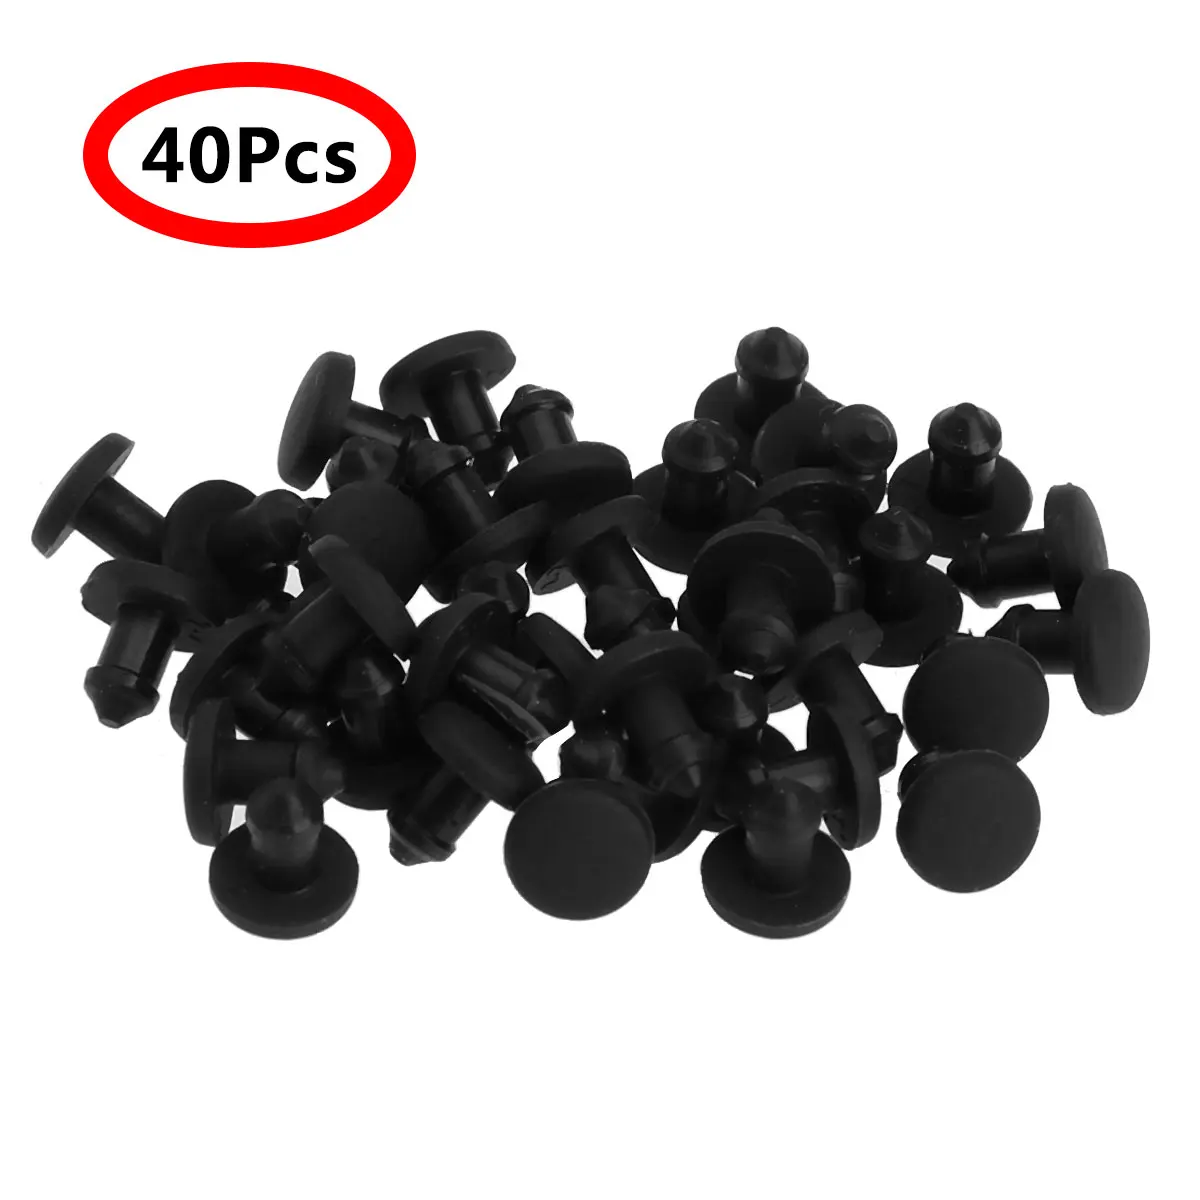 40Pcs Rubber Plug Stopper High Temperature Resistant Round Insert Solid Caps USA 